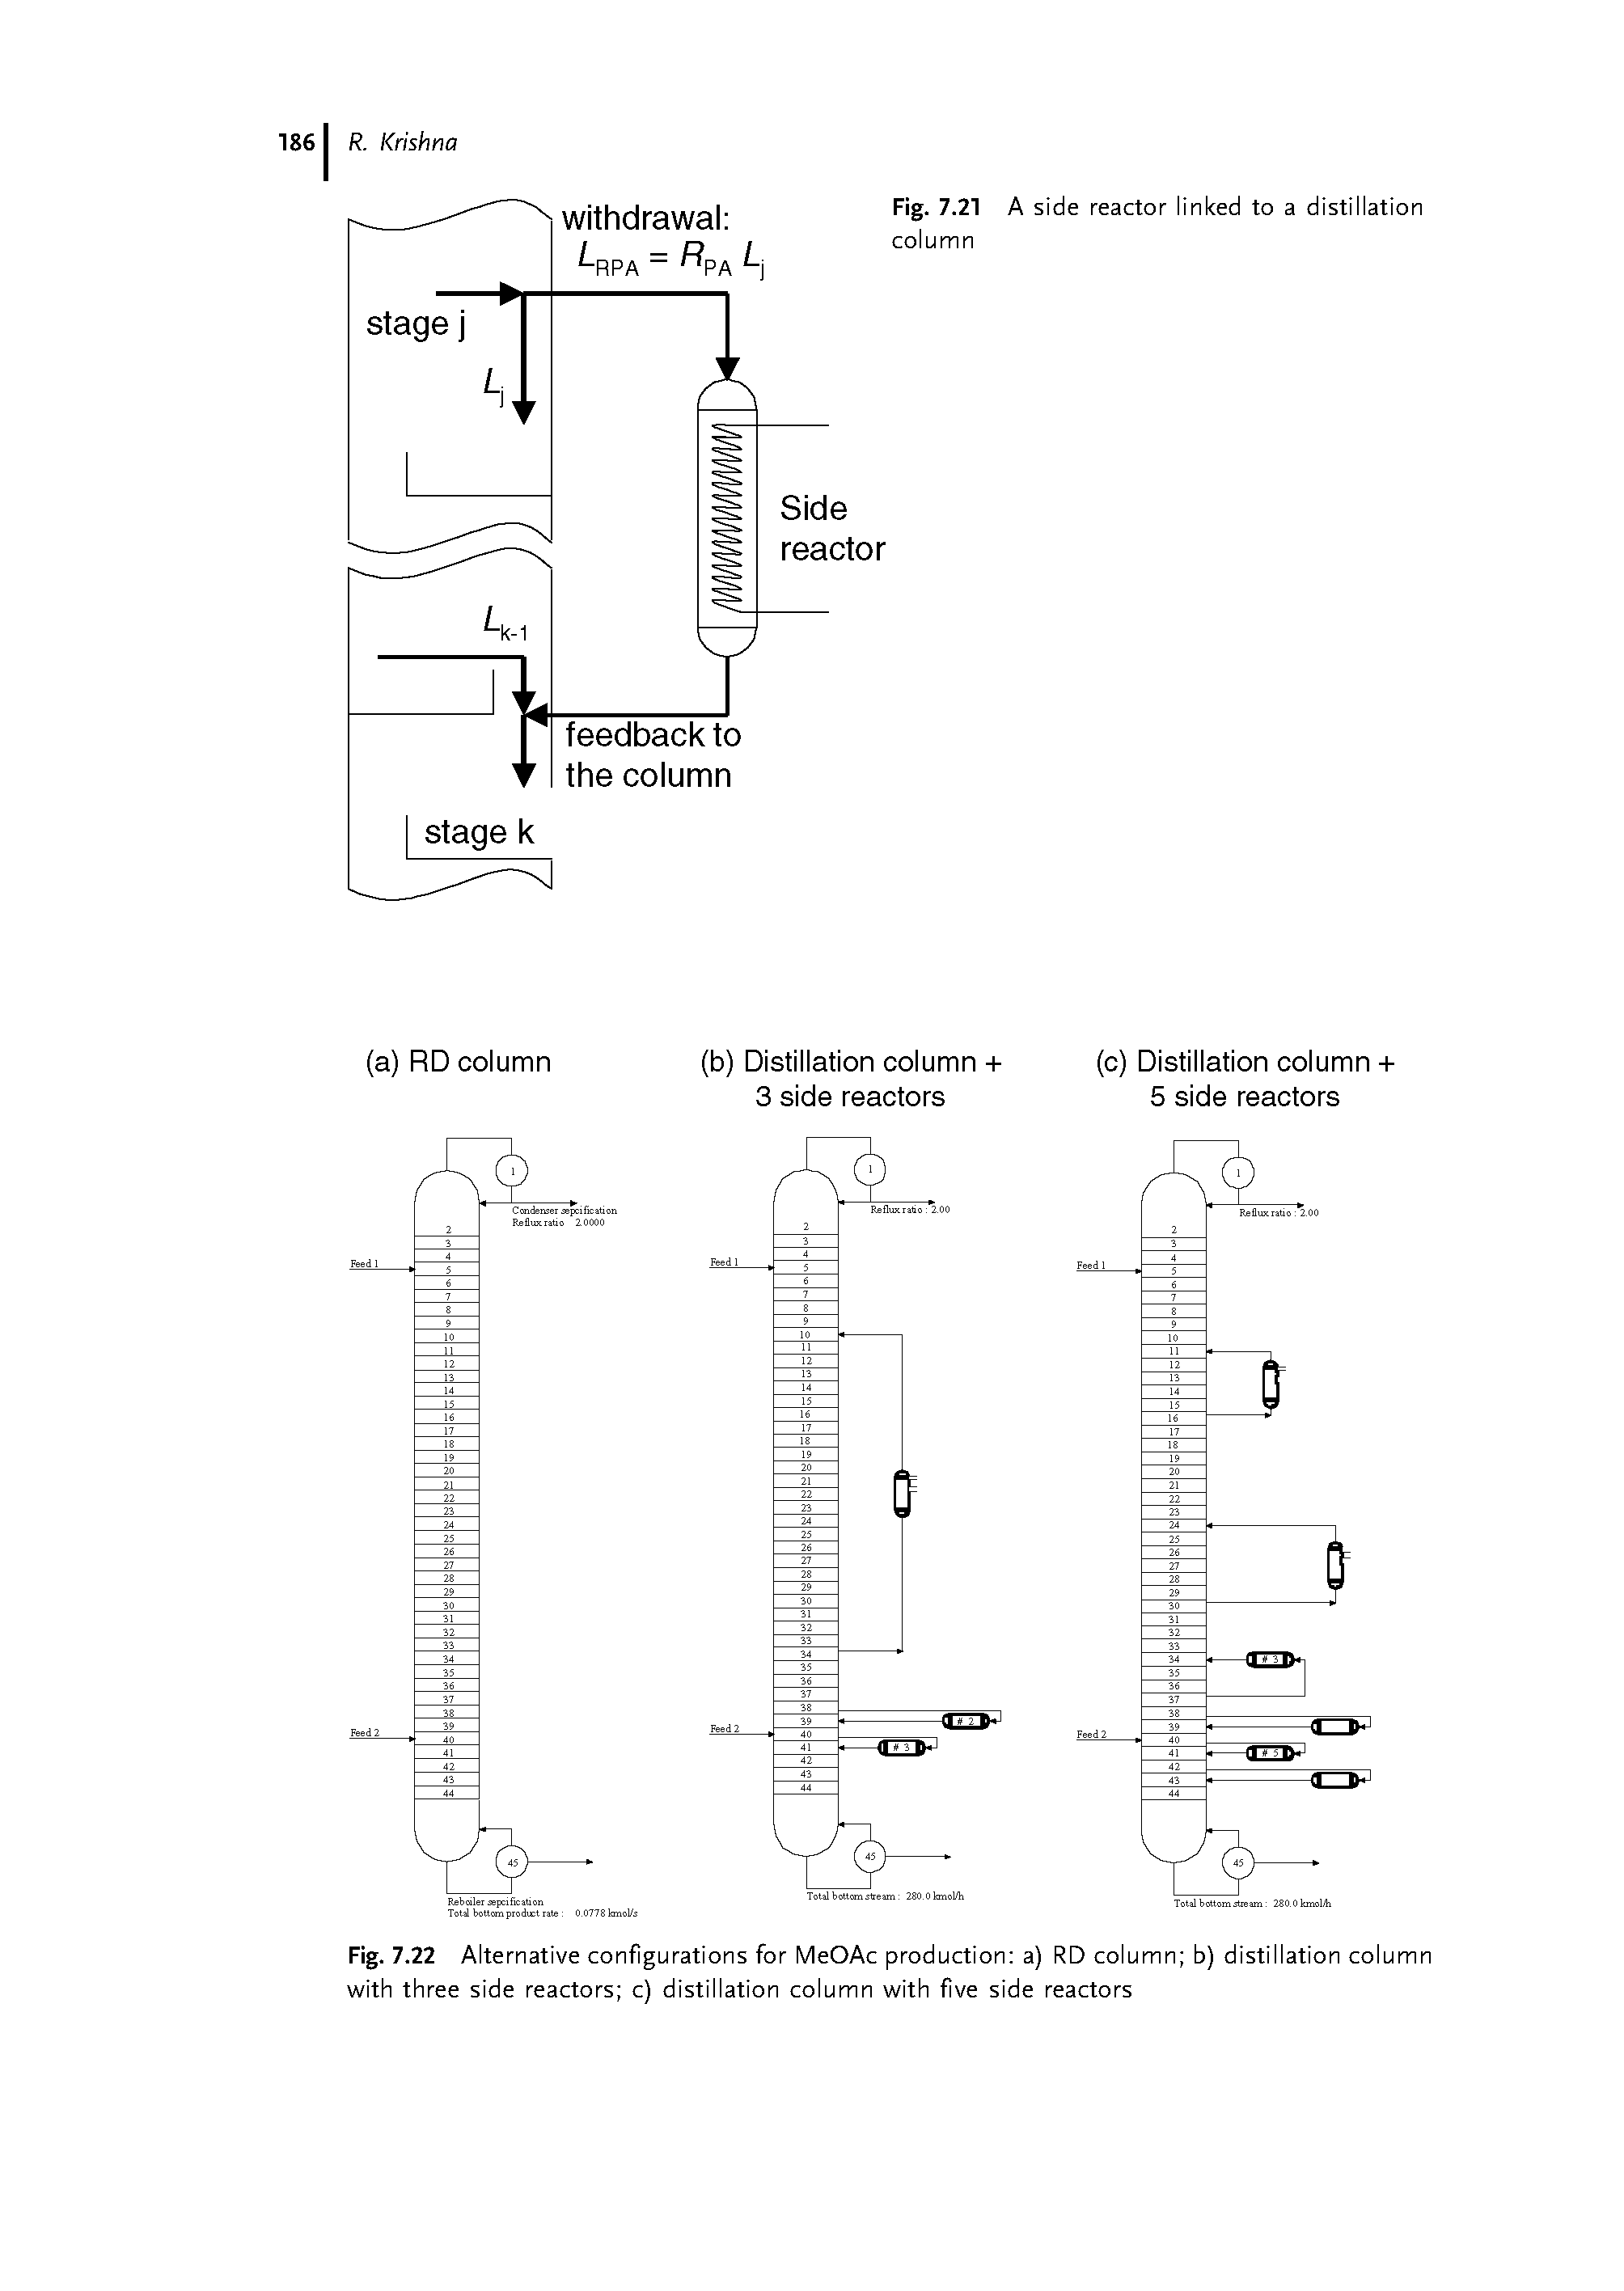 Fig. 7.22 Alternative configurations for MeOAc production a) RD column b) distillation column A/ith three side reactors c) distillation column A/ith five side reactors...